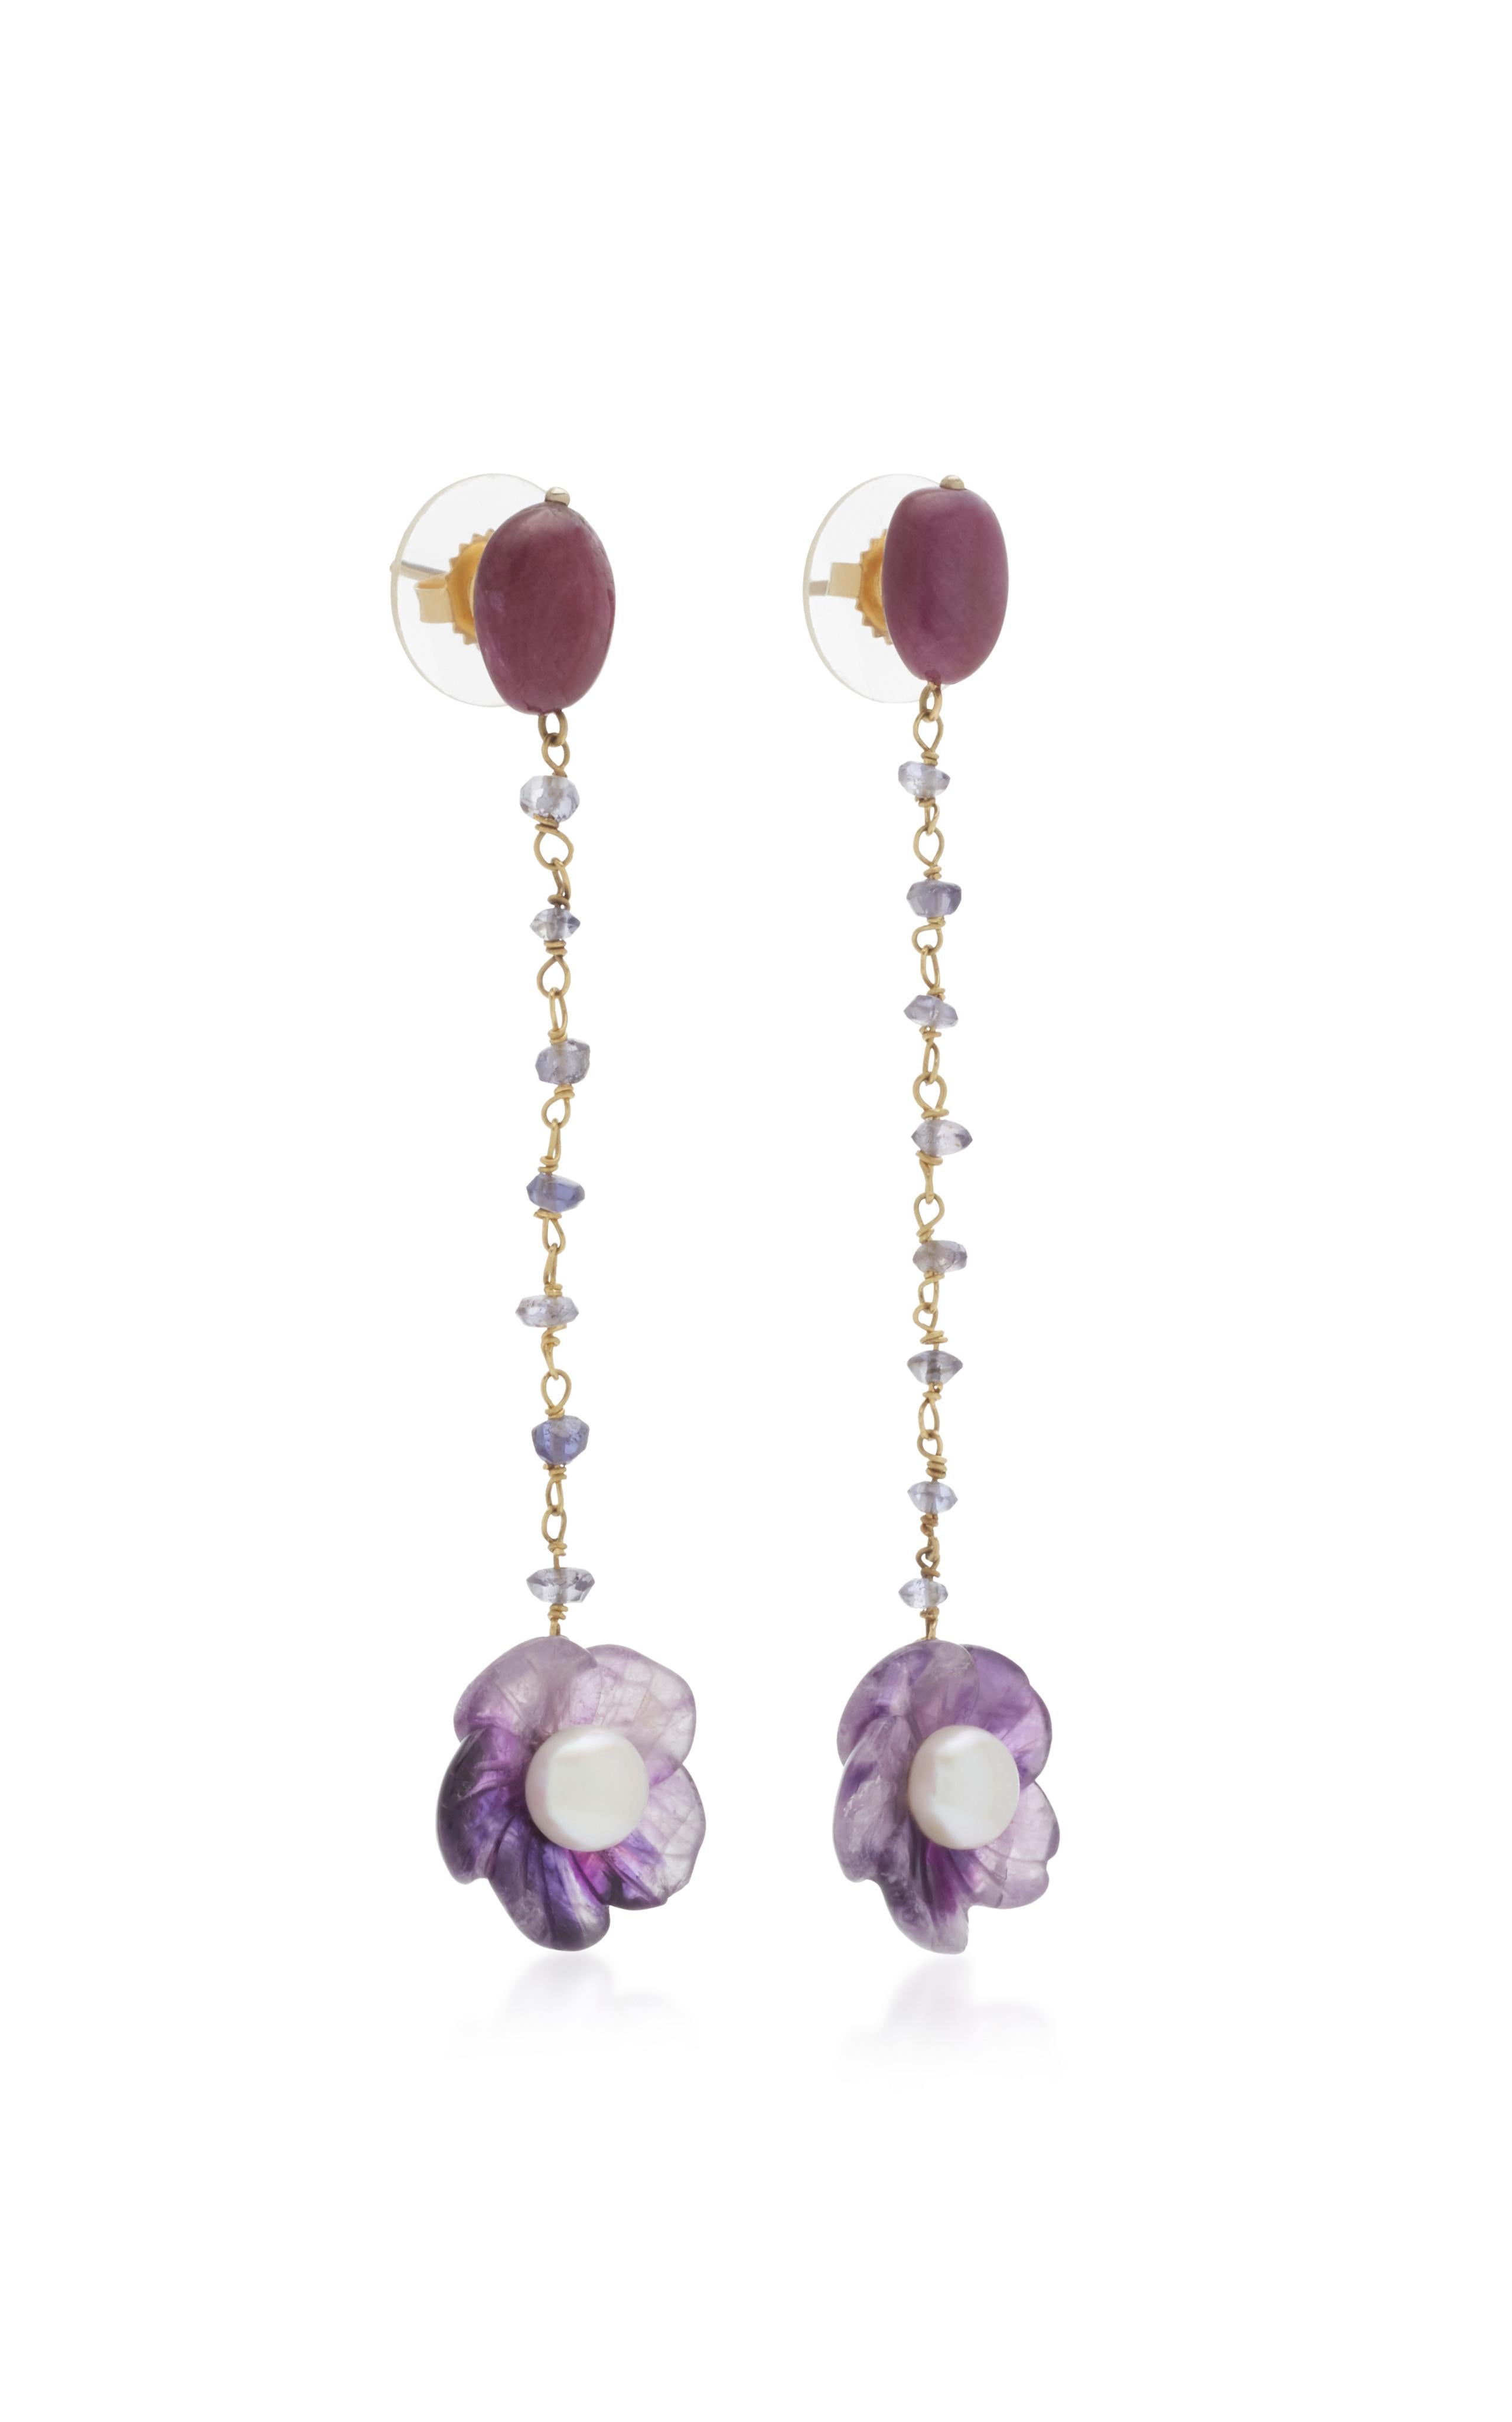 Contemporary Sorab & Roshi Ruby Nugget Earrings with Amethyst Flower Pearl Center Dangle For Sale